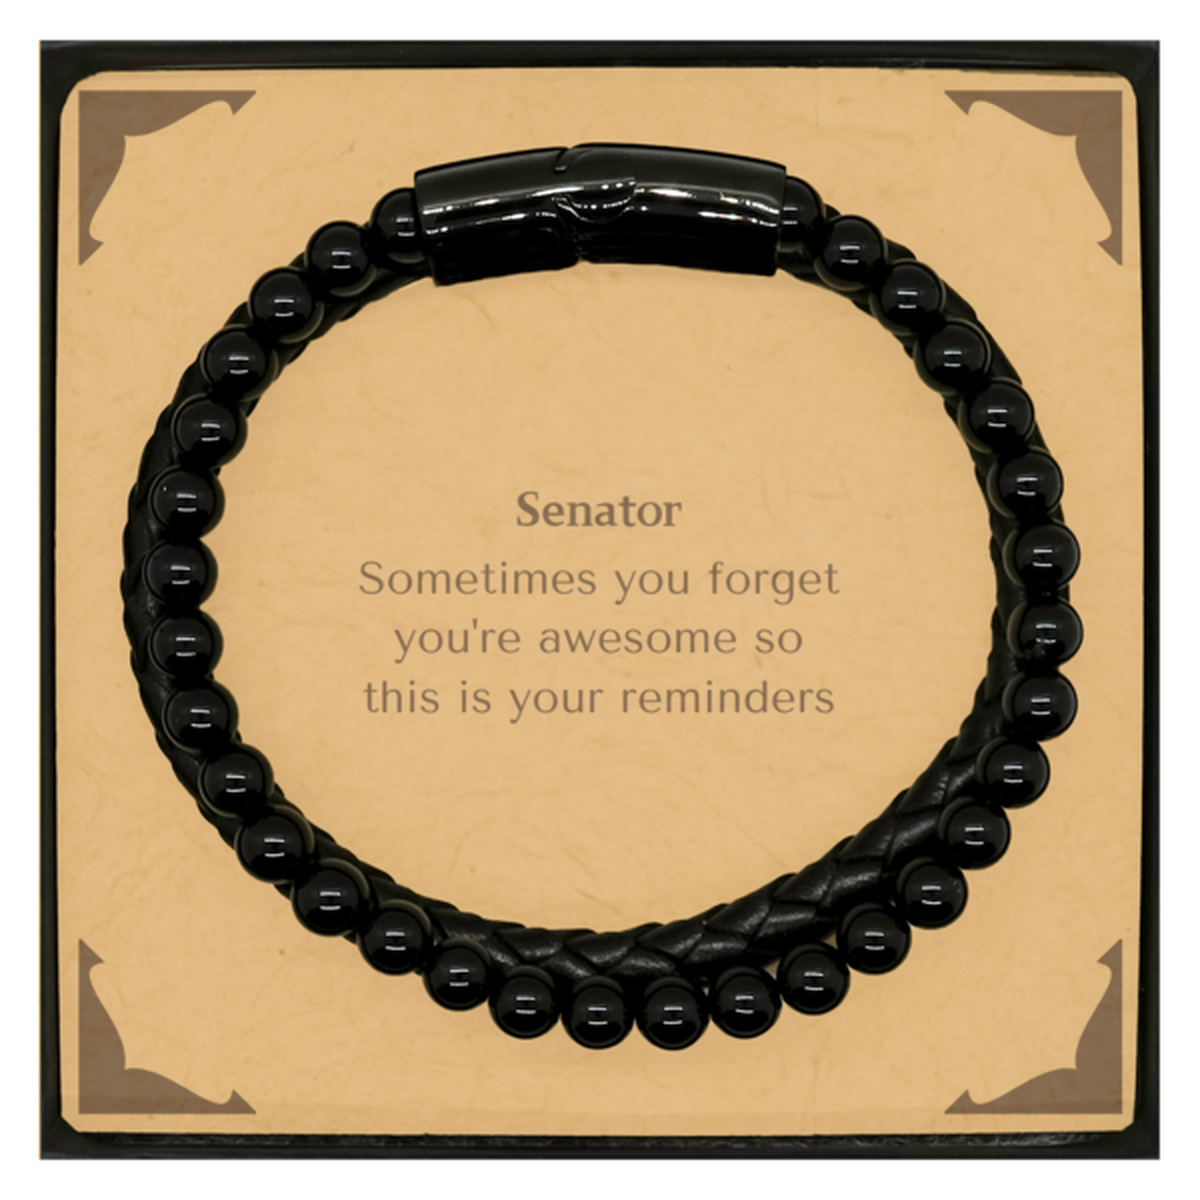 Sentimental Senator Stone Leather Bracelets, Senator Sometimes you forget you're awesome so this is your reminders, Graduation Christmas Birthday Gifts for Senator, Men, Women, Coworkers